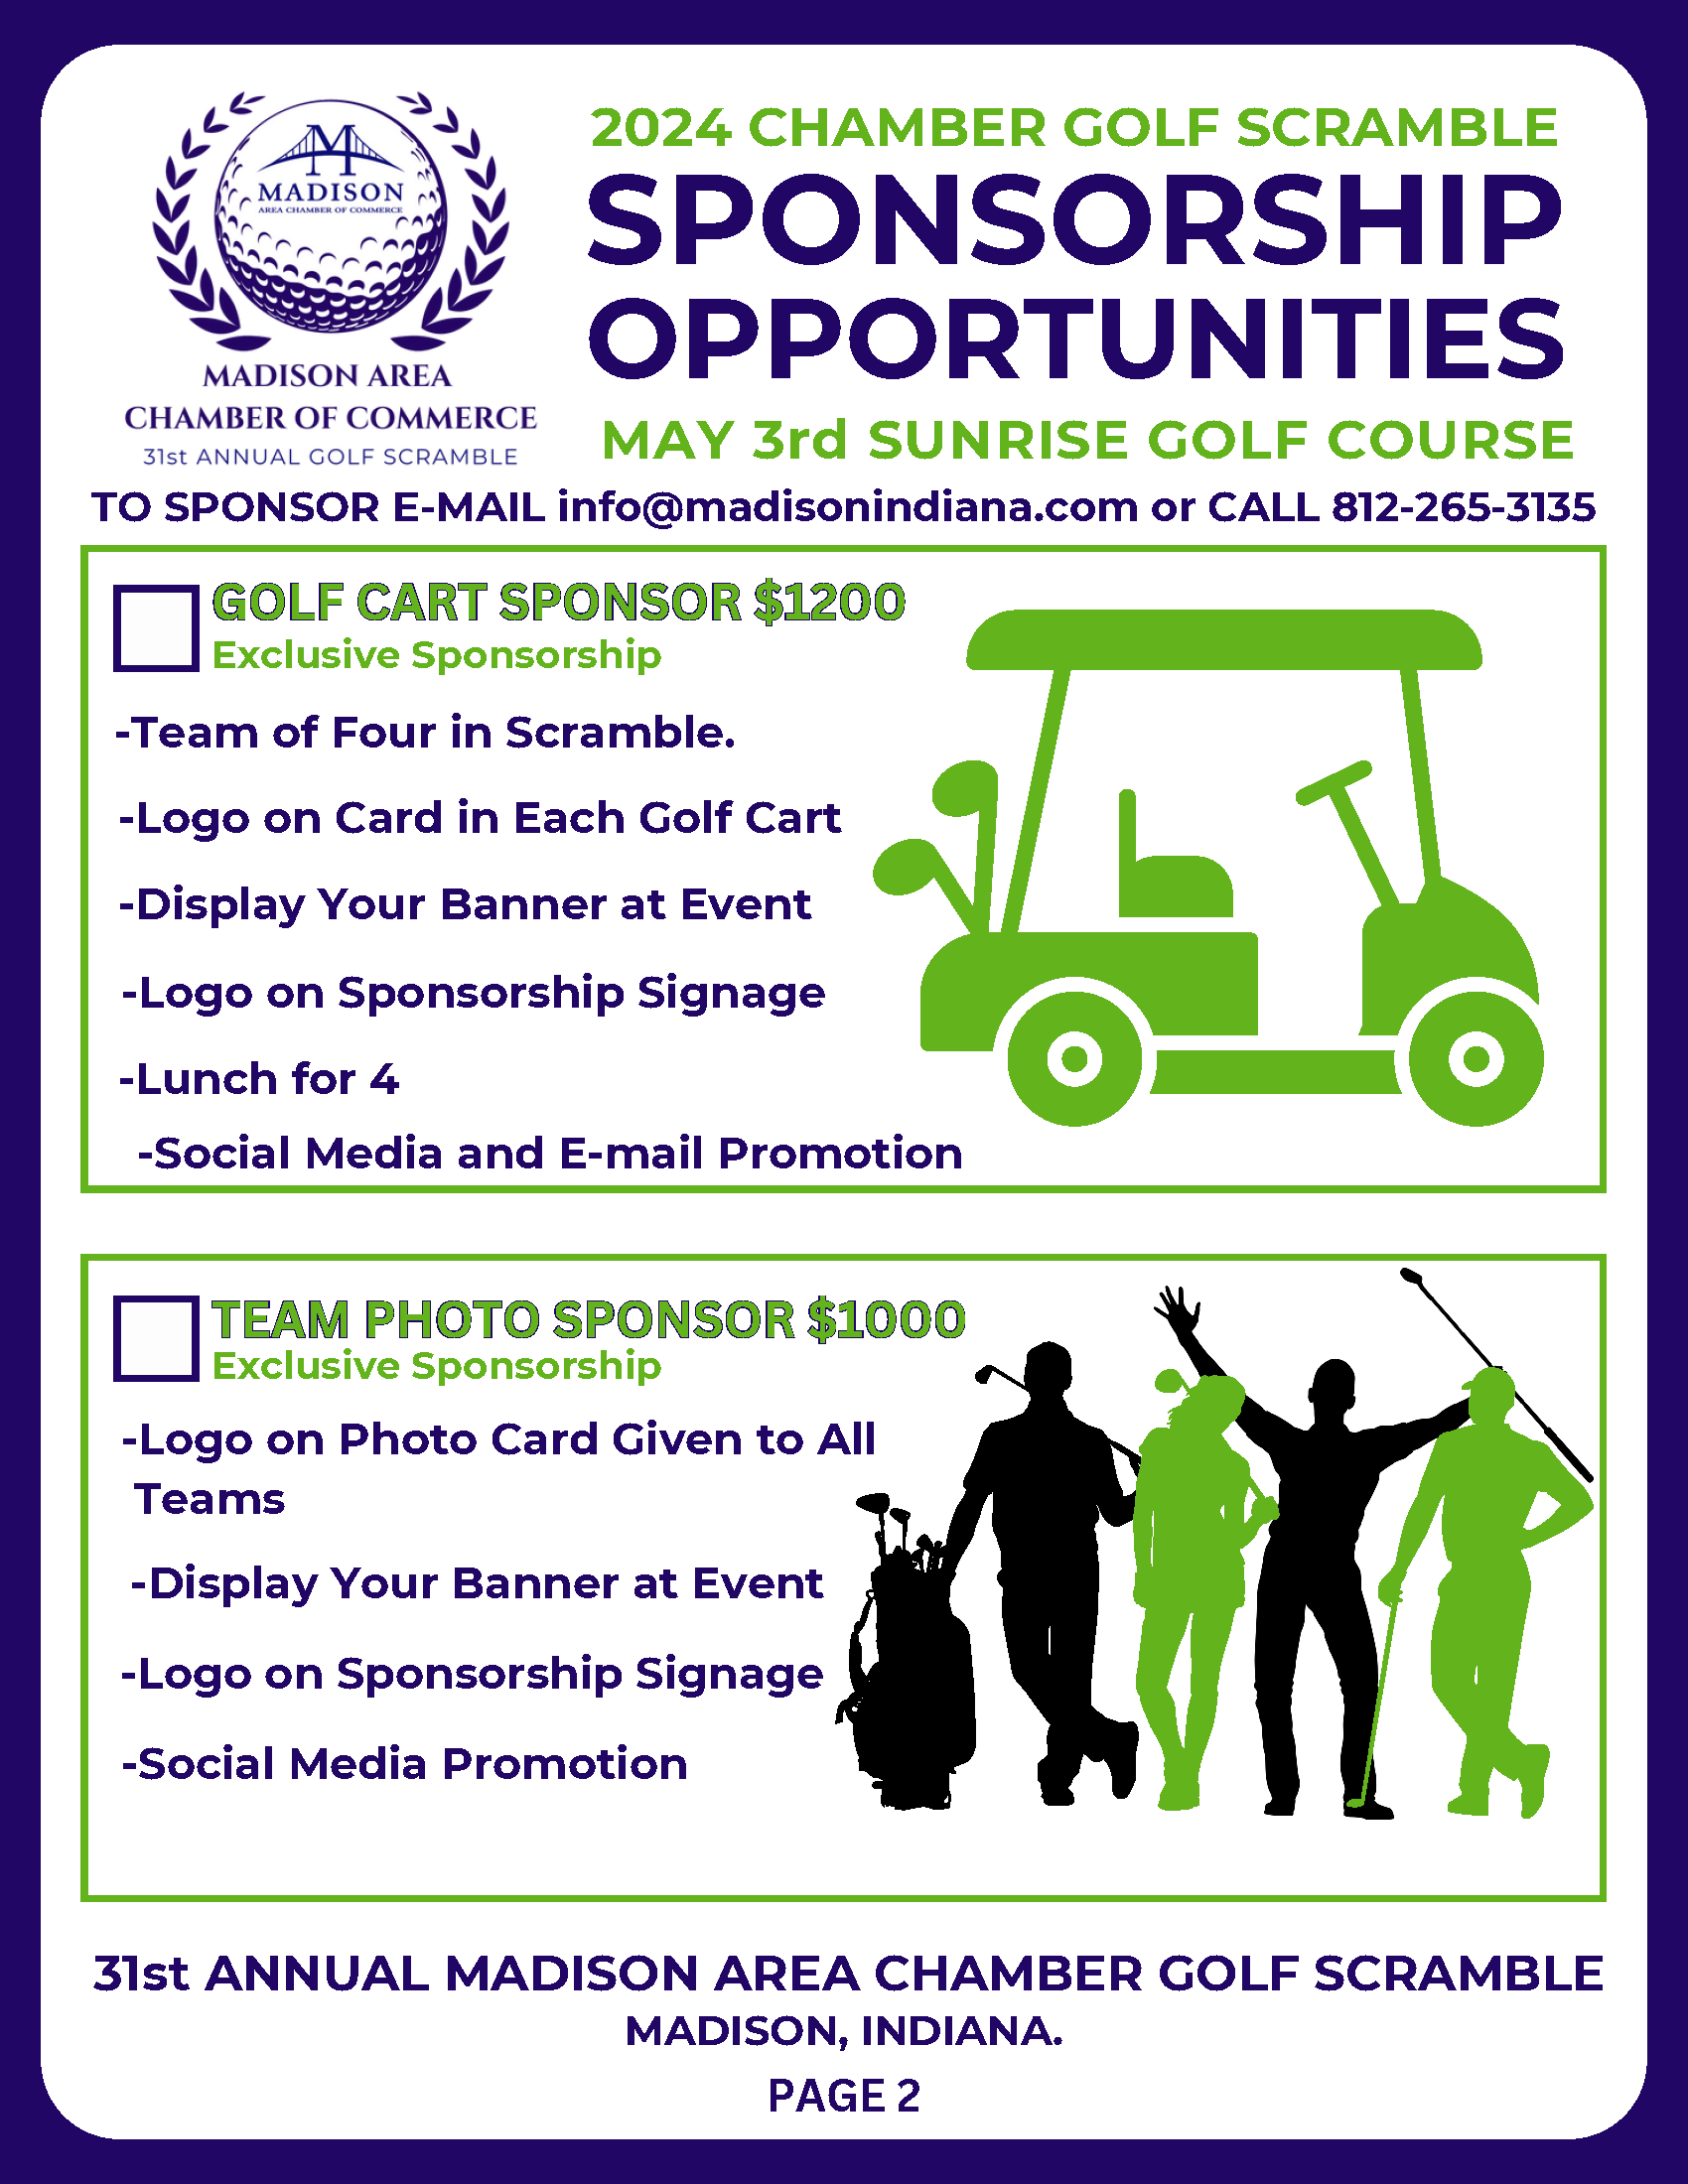 2024 Madison area Chamber of Commerce 31st Annual Golf Scramble Sponsorship Opportunities